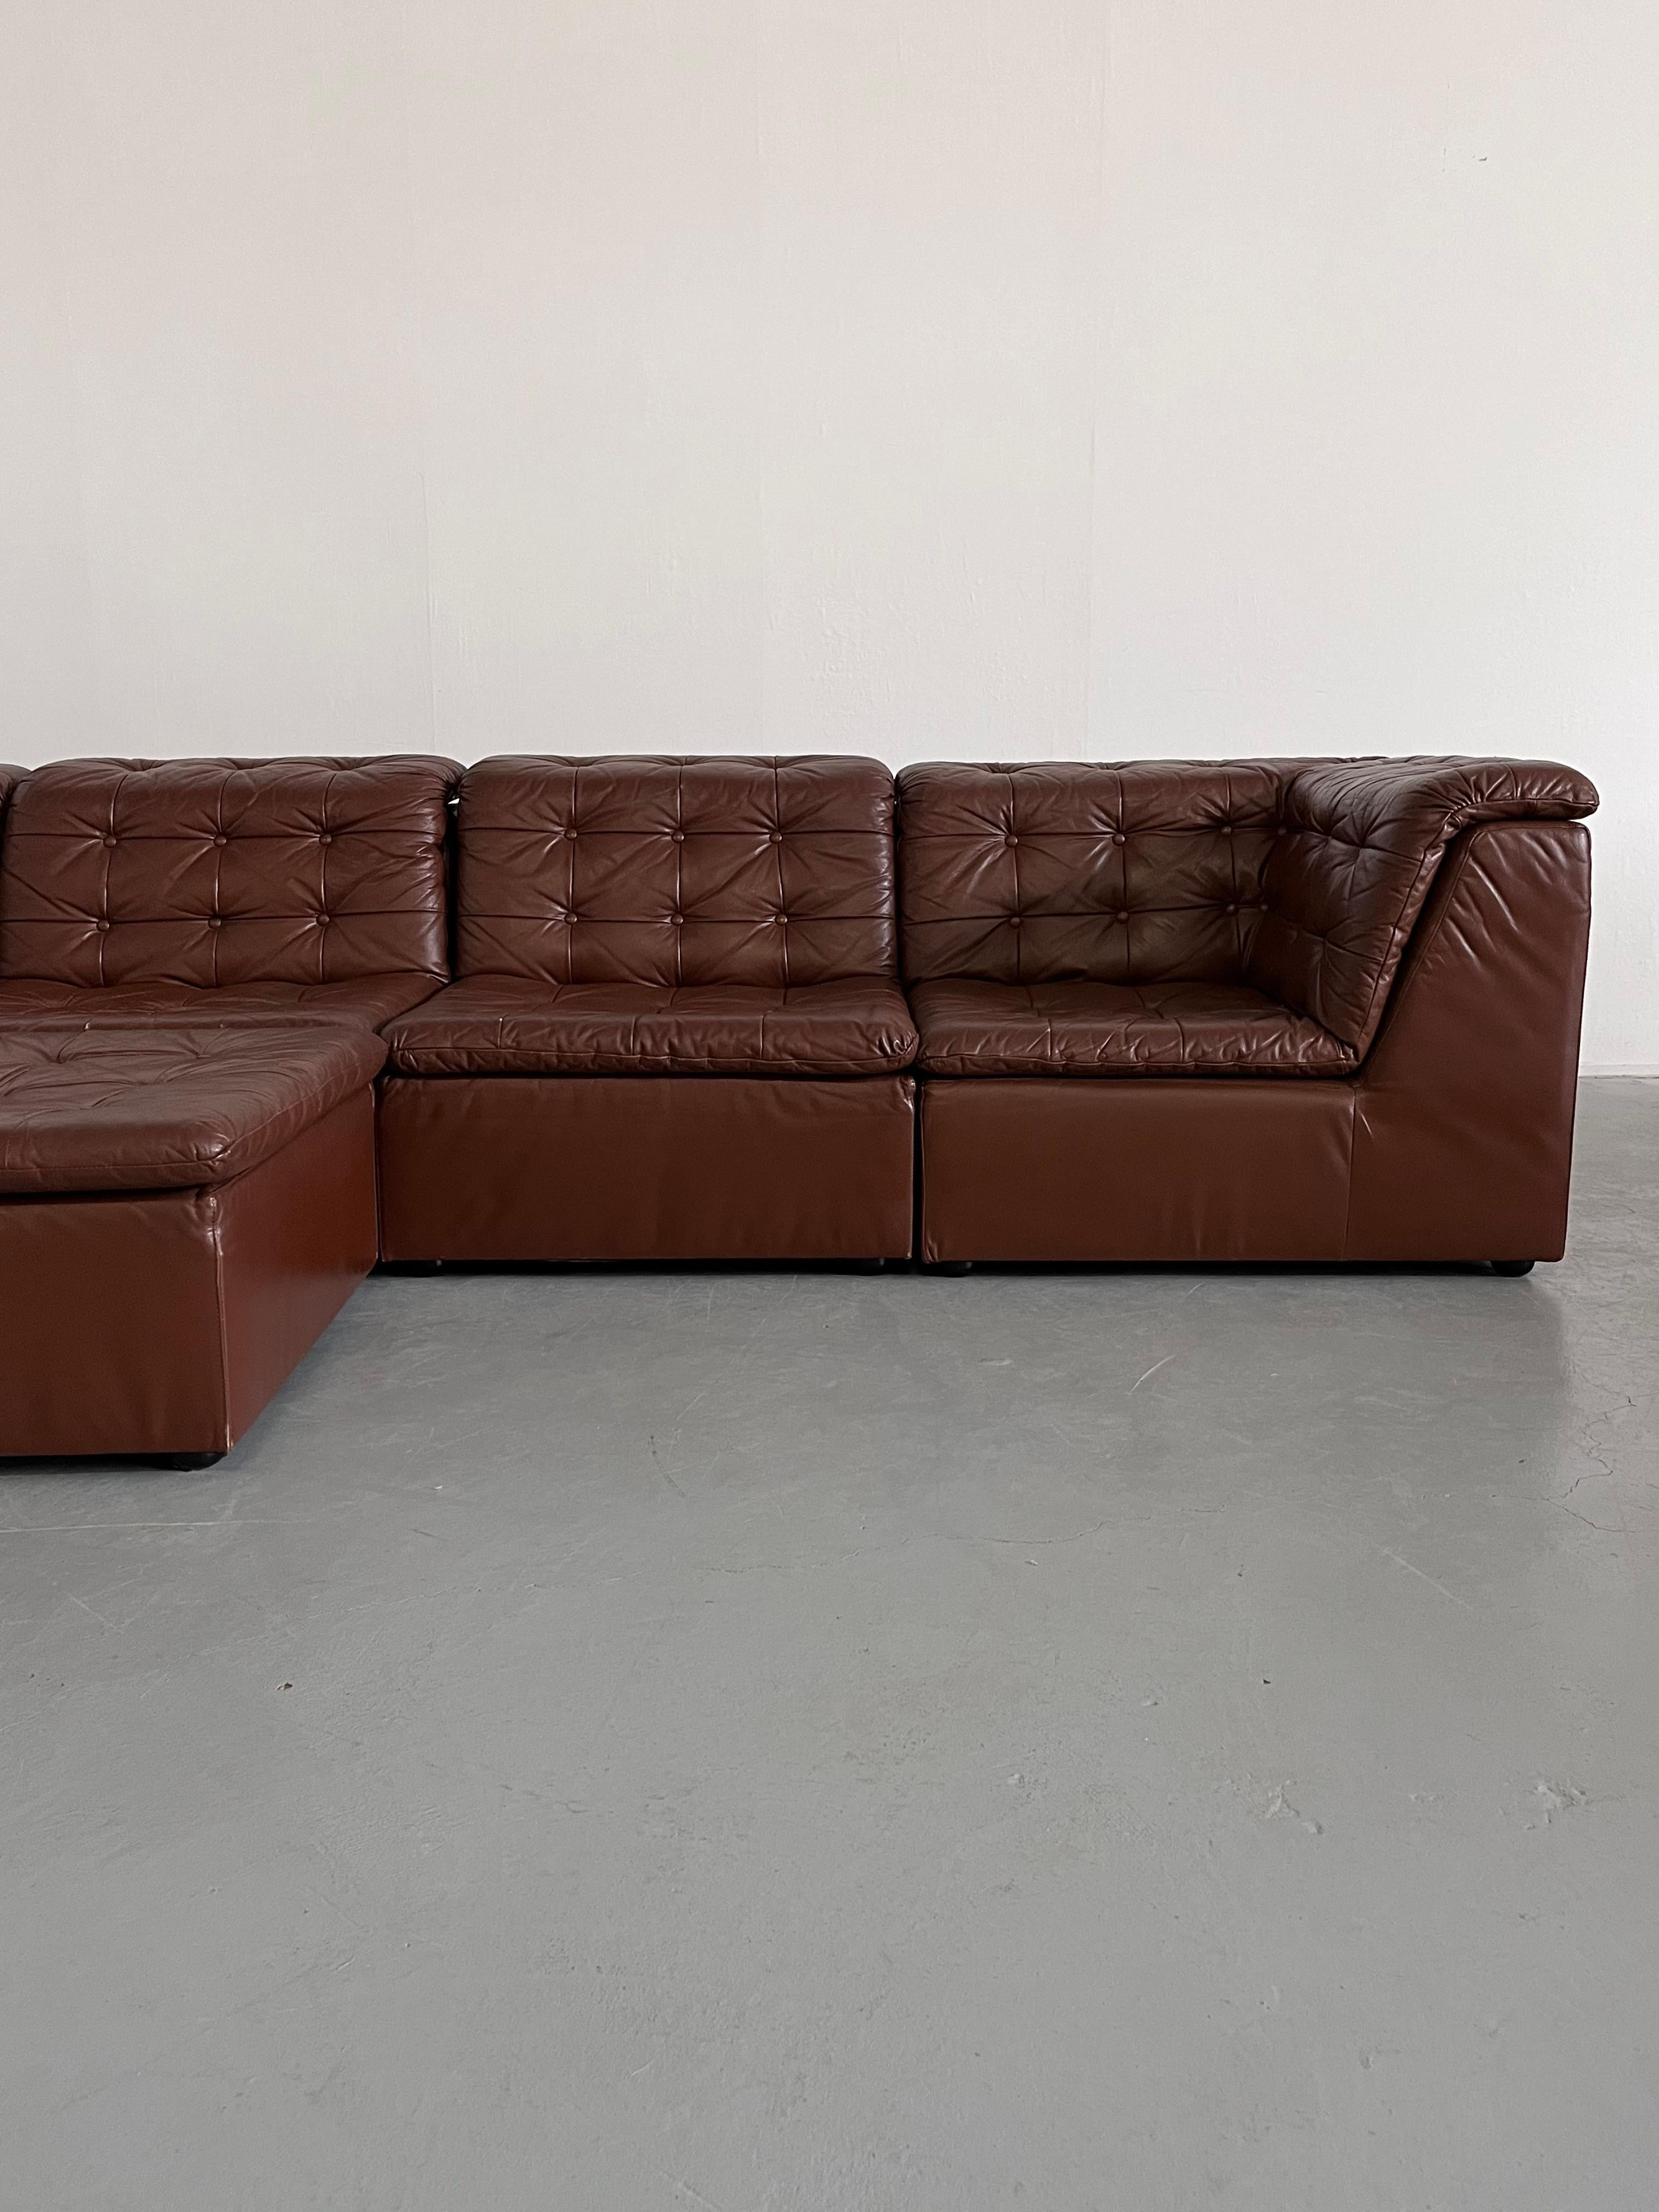 Vintage Patchwork Cognac Leather Six-Part Modular Sofa by Laauser, 1970s Germany For Sale 4